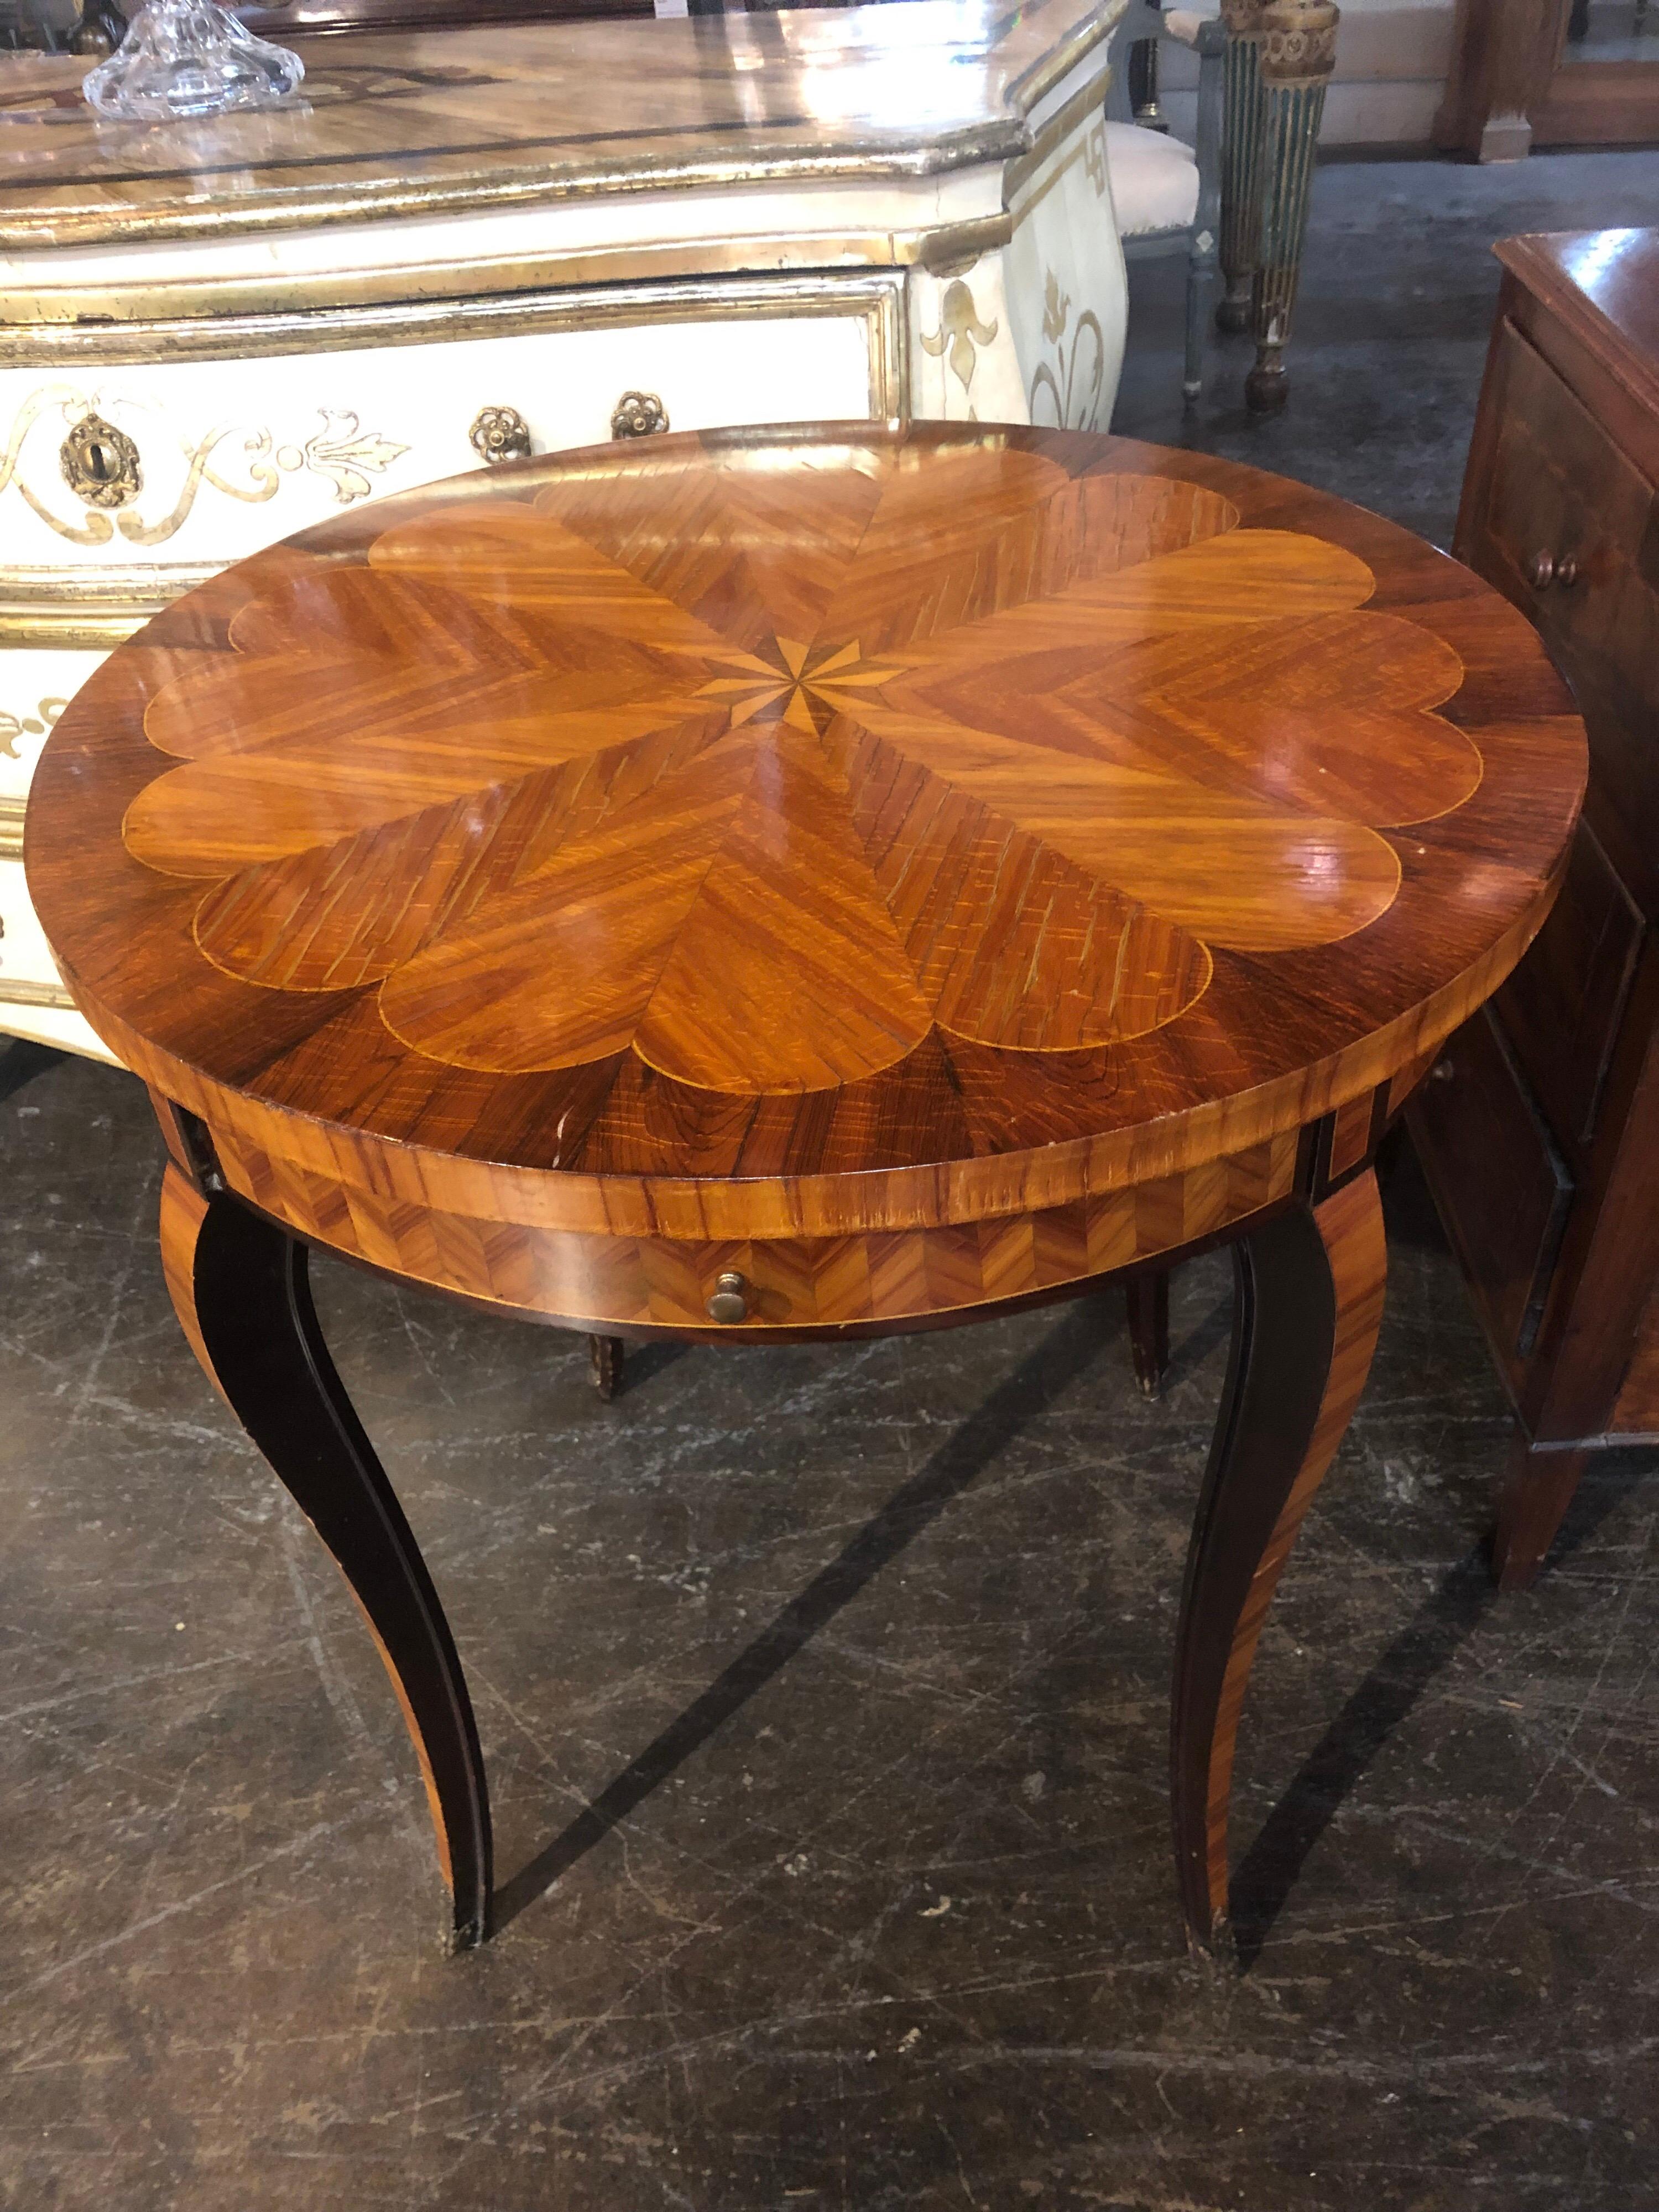 Lovely mahogany side table inlaid with intricate design. Fine craftsmanship makes this a beautiful piece for an elegant home.